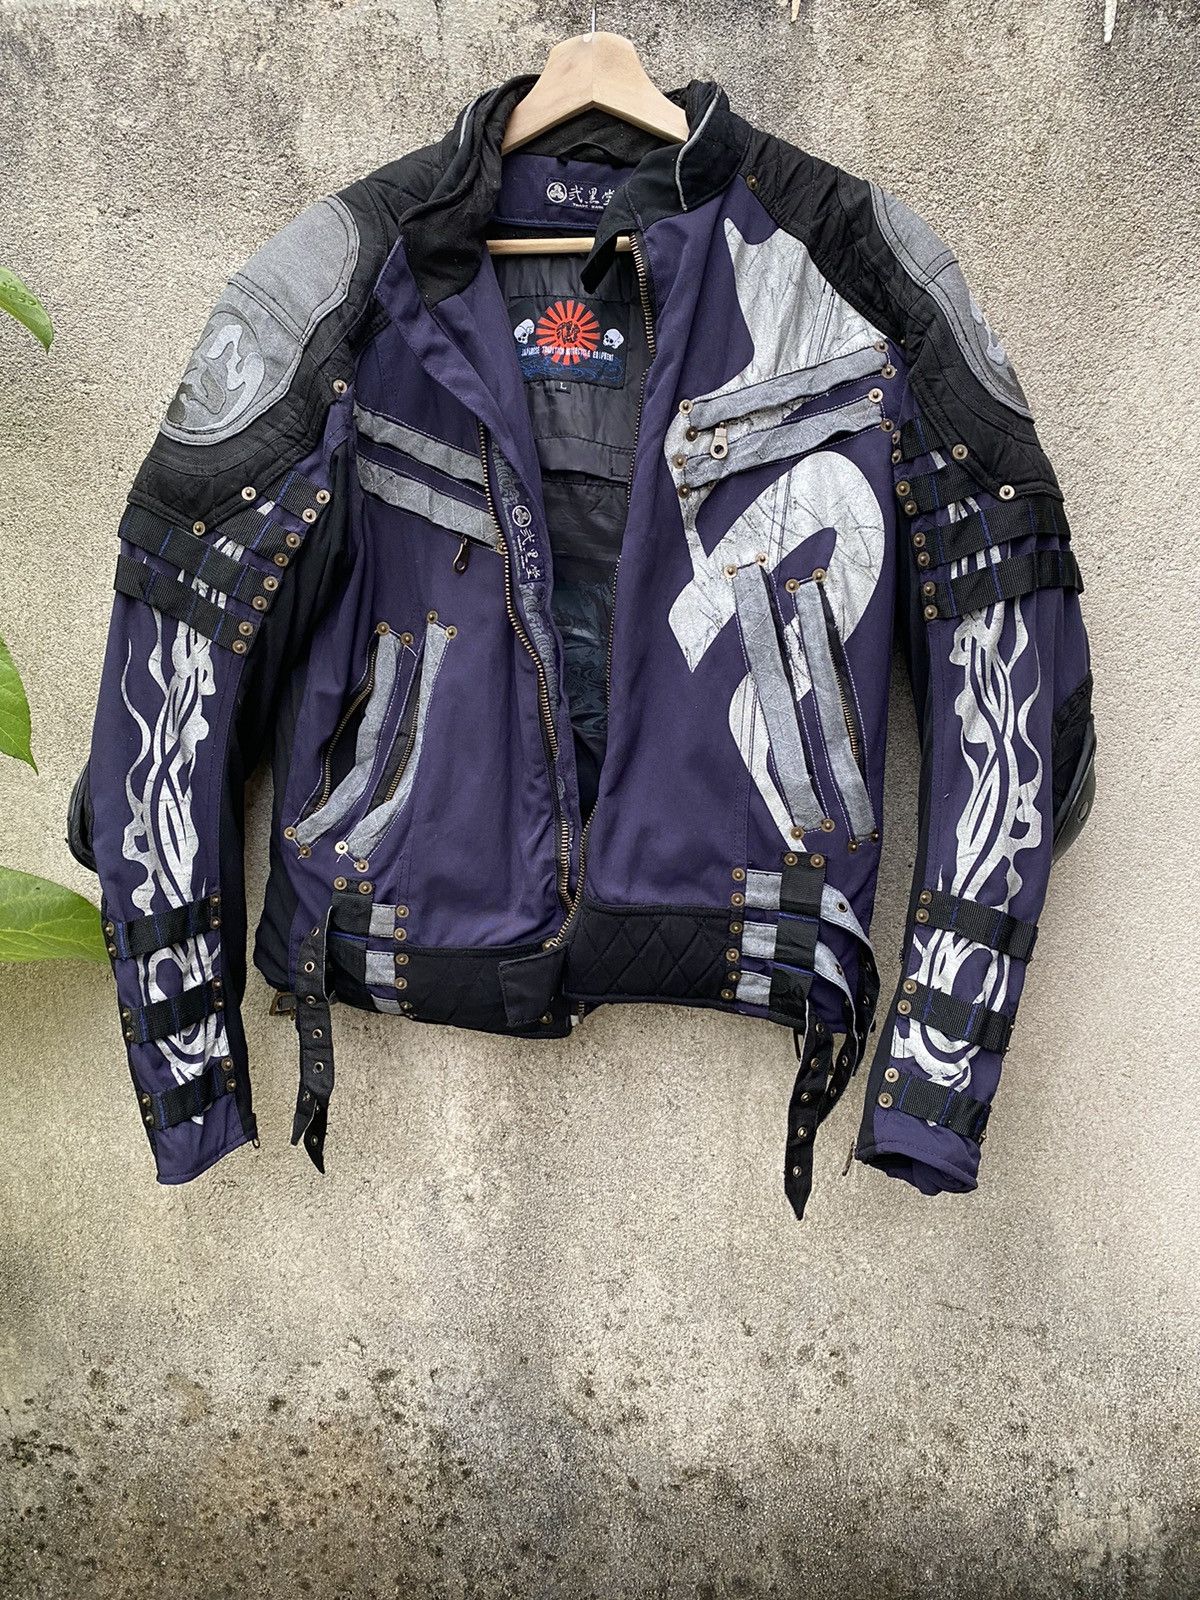 Sports Specialties - 🔥 Japanese Tradition Motorcycle Riding Jacket Rare Design - 1